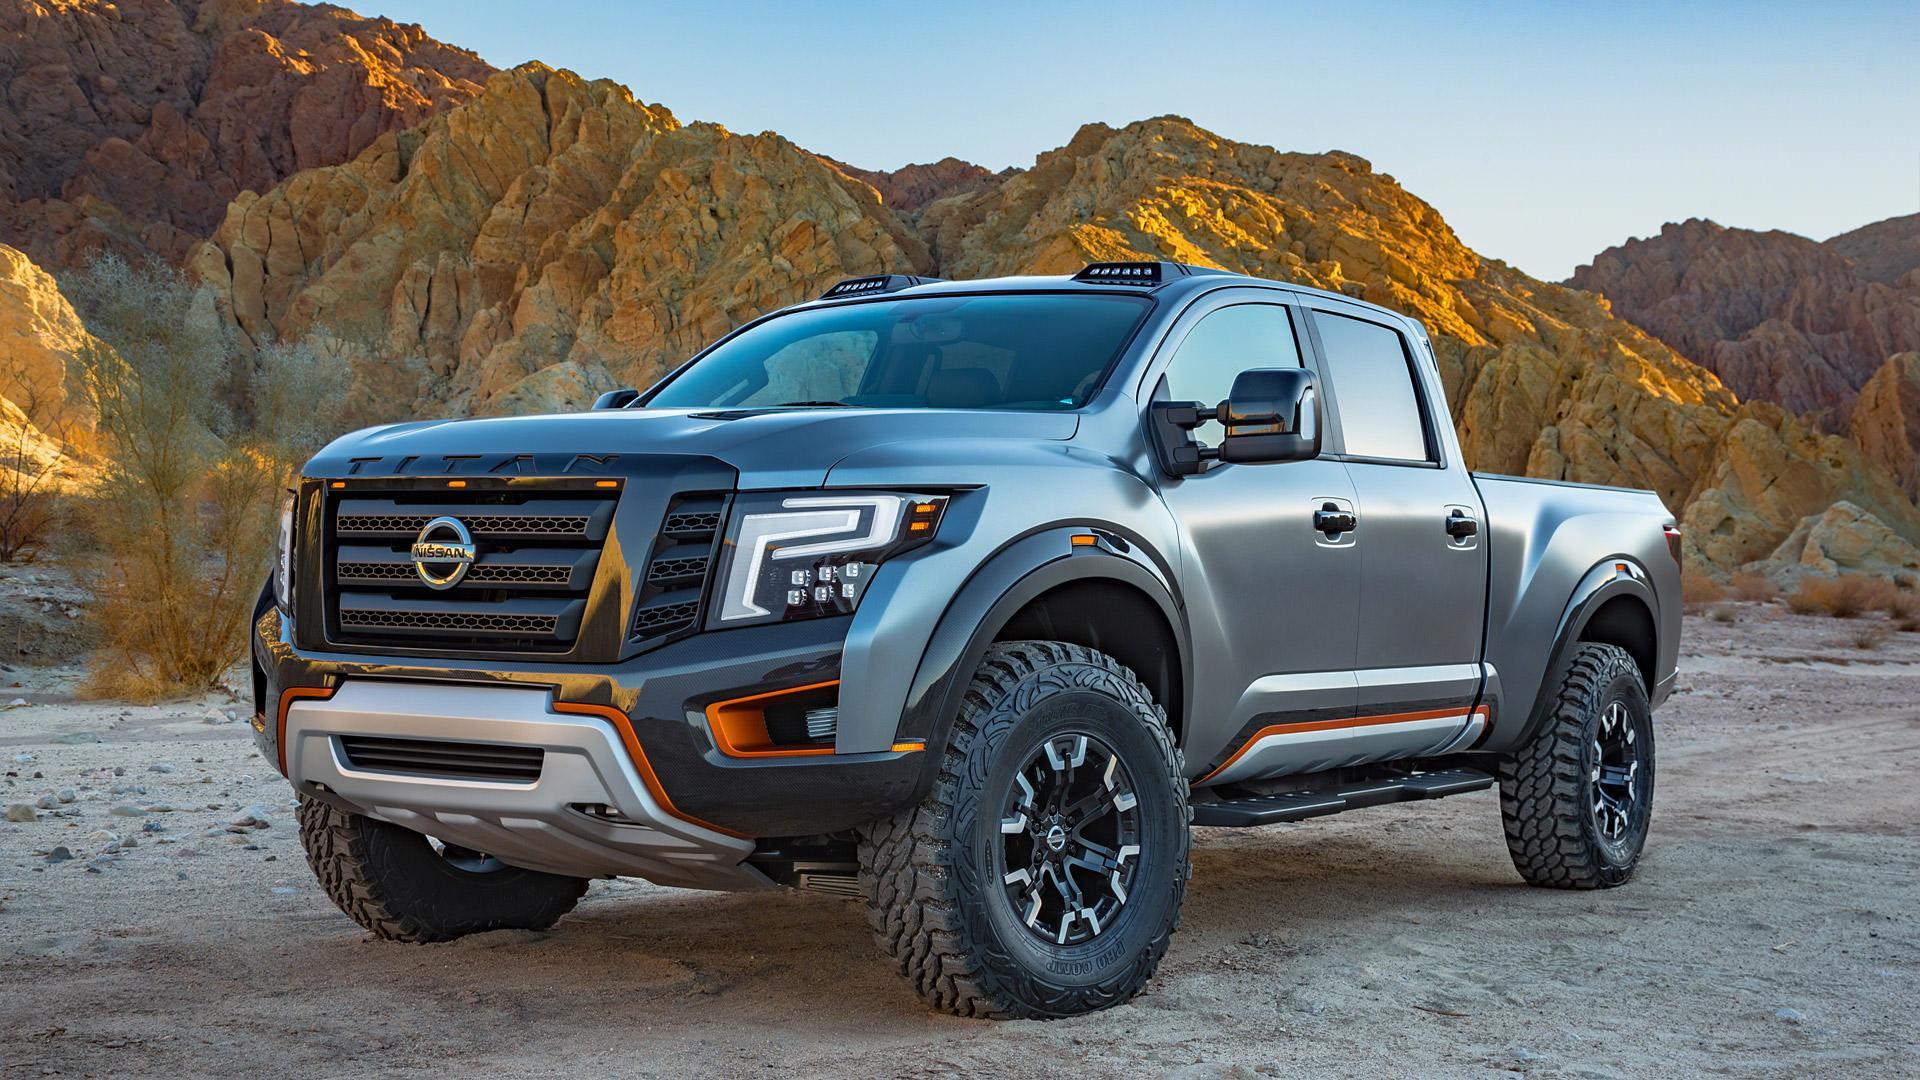 Nissan Titan Wallpaper for Android